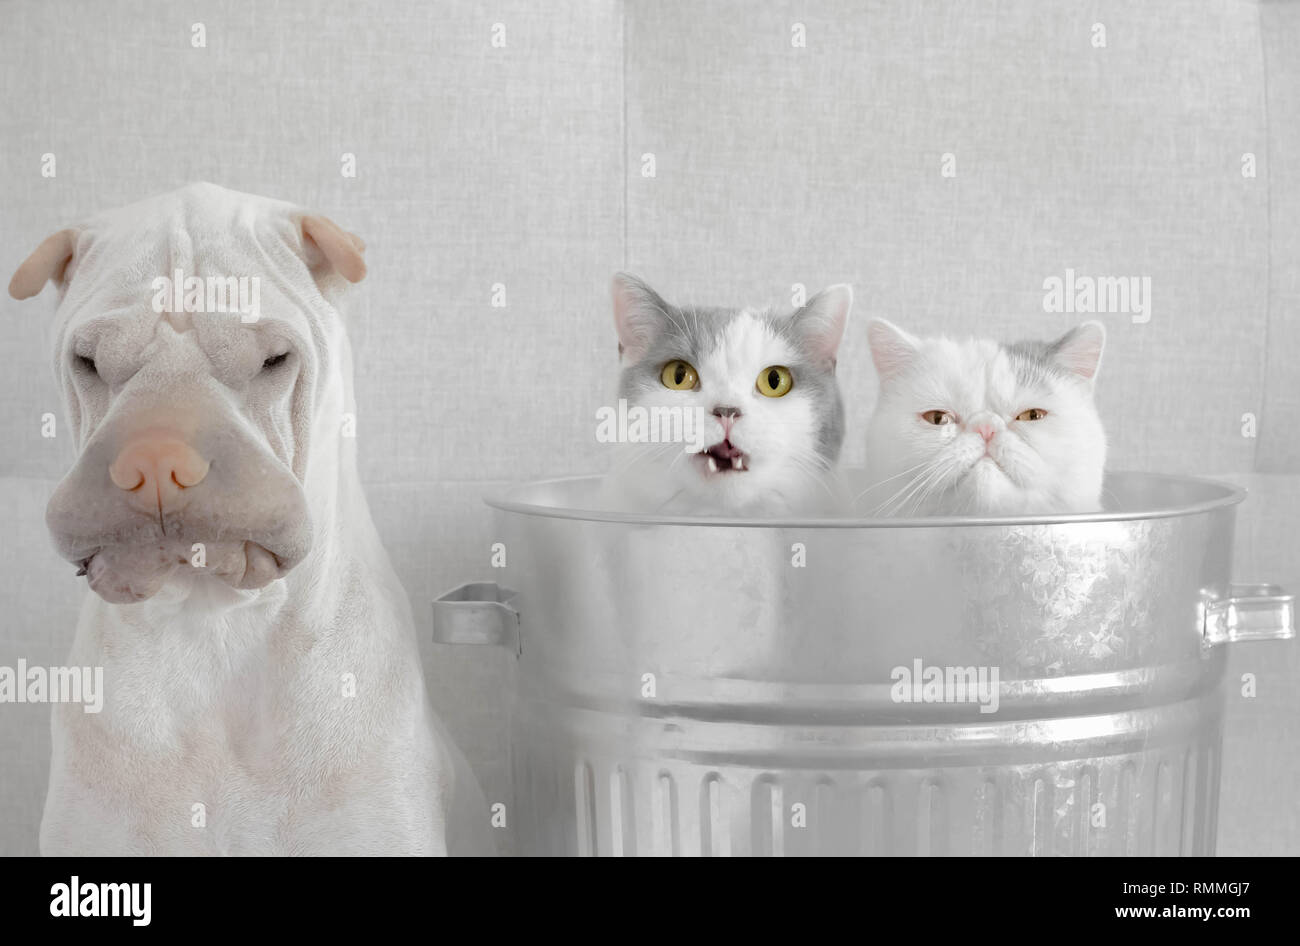 Two cats sitting in a trash can next to a shar-pei dog Stock Photo